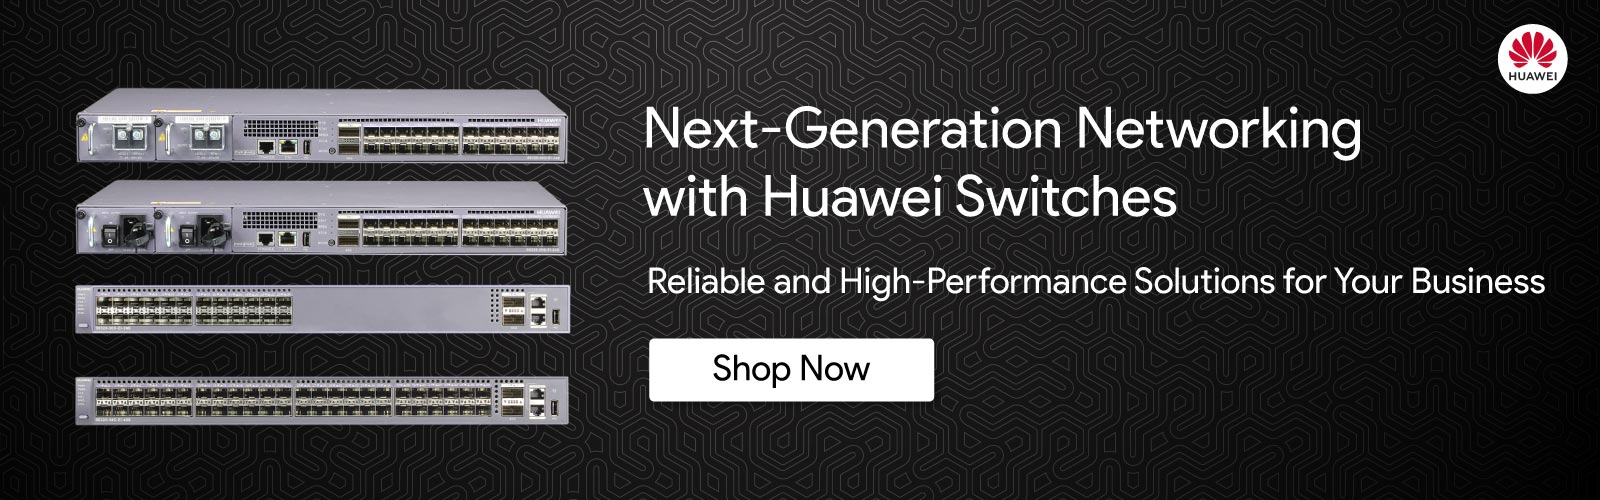 Huawei-Switches